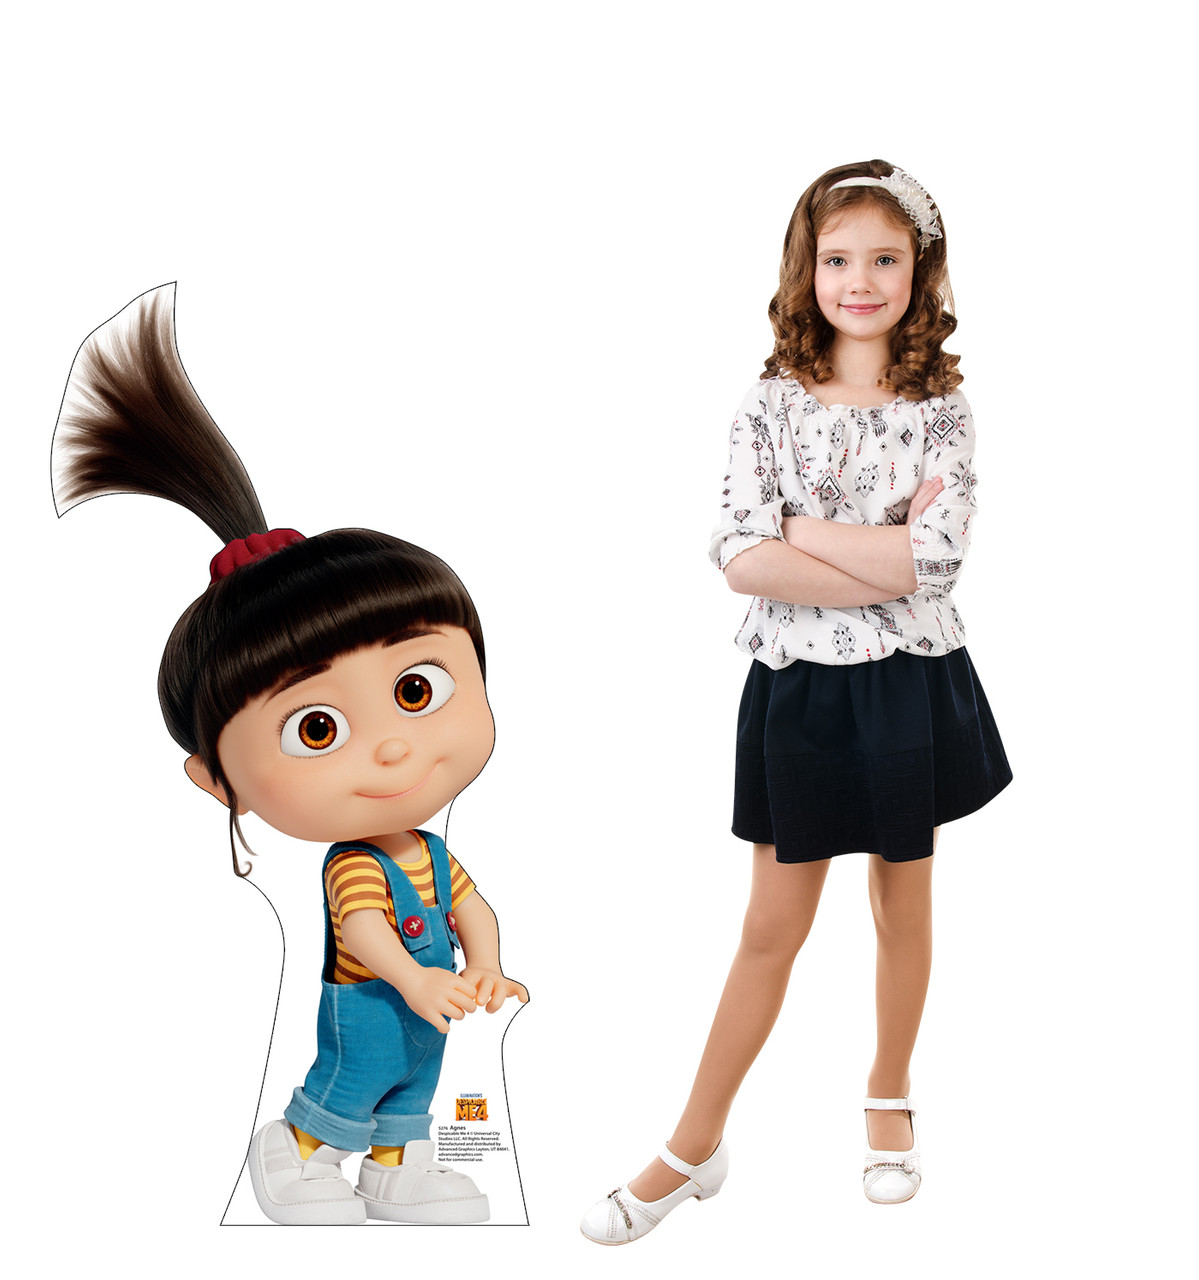 Life-size cardboard standee of Agnes with model.